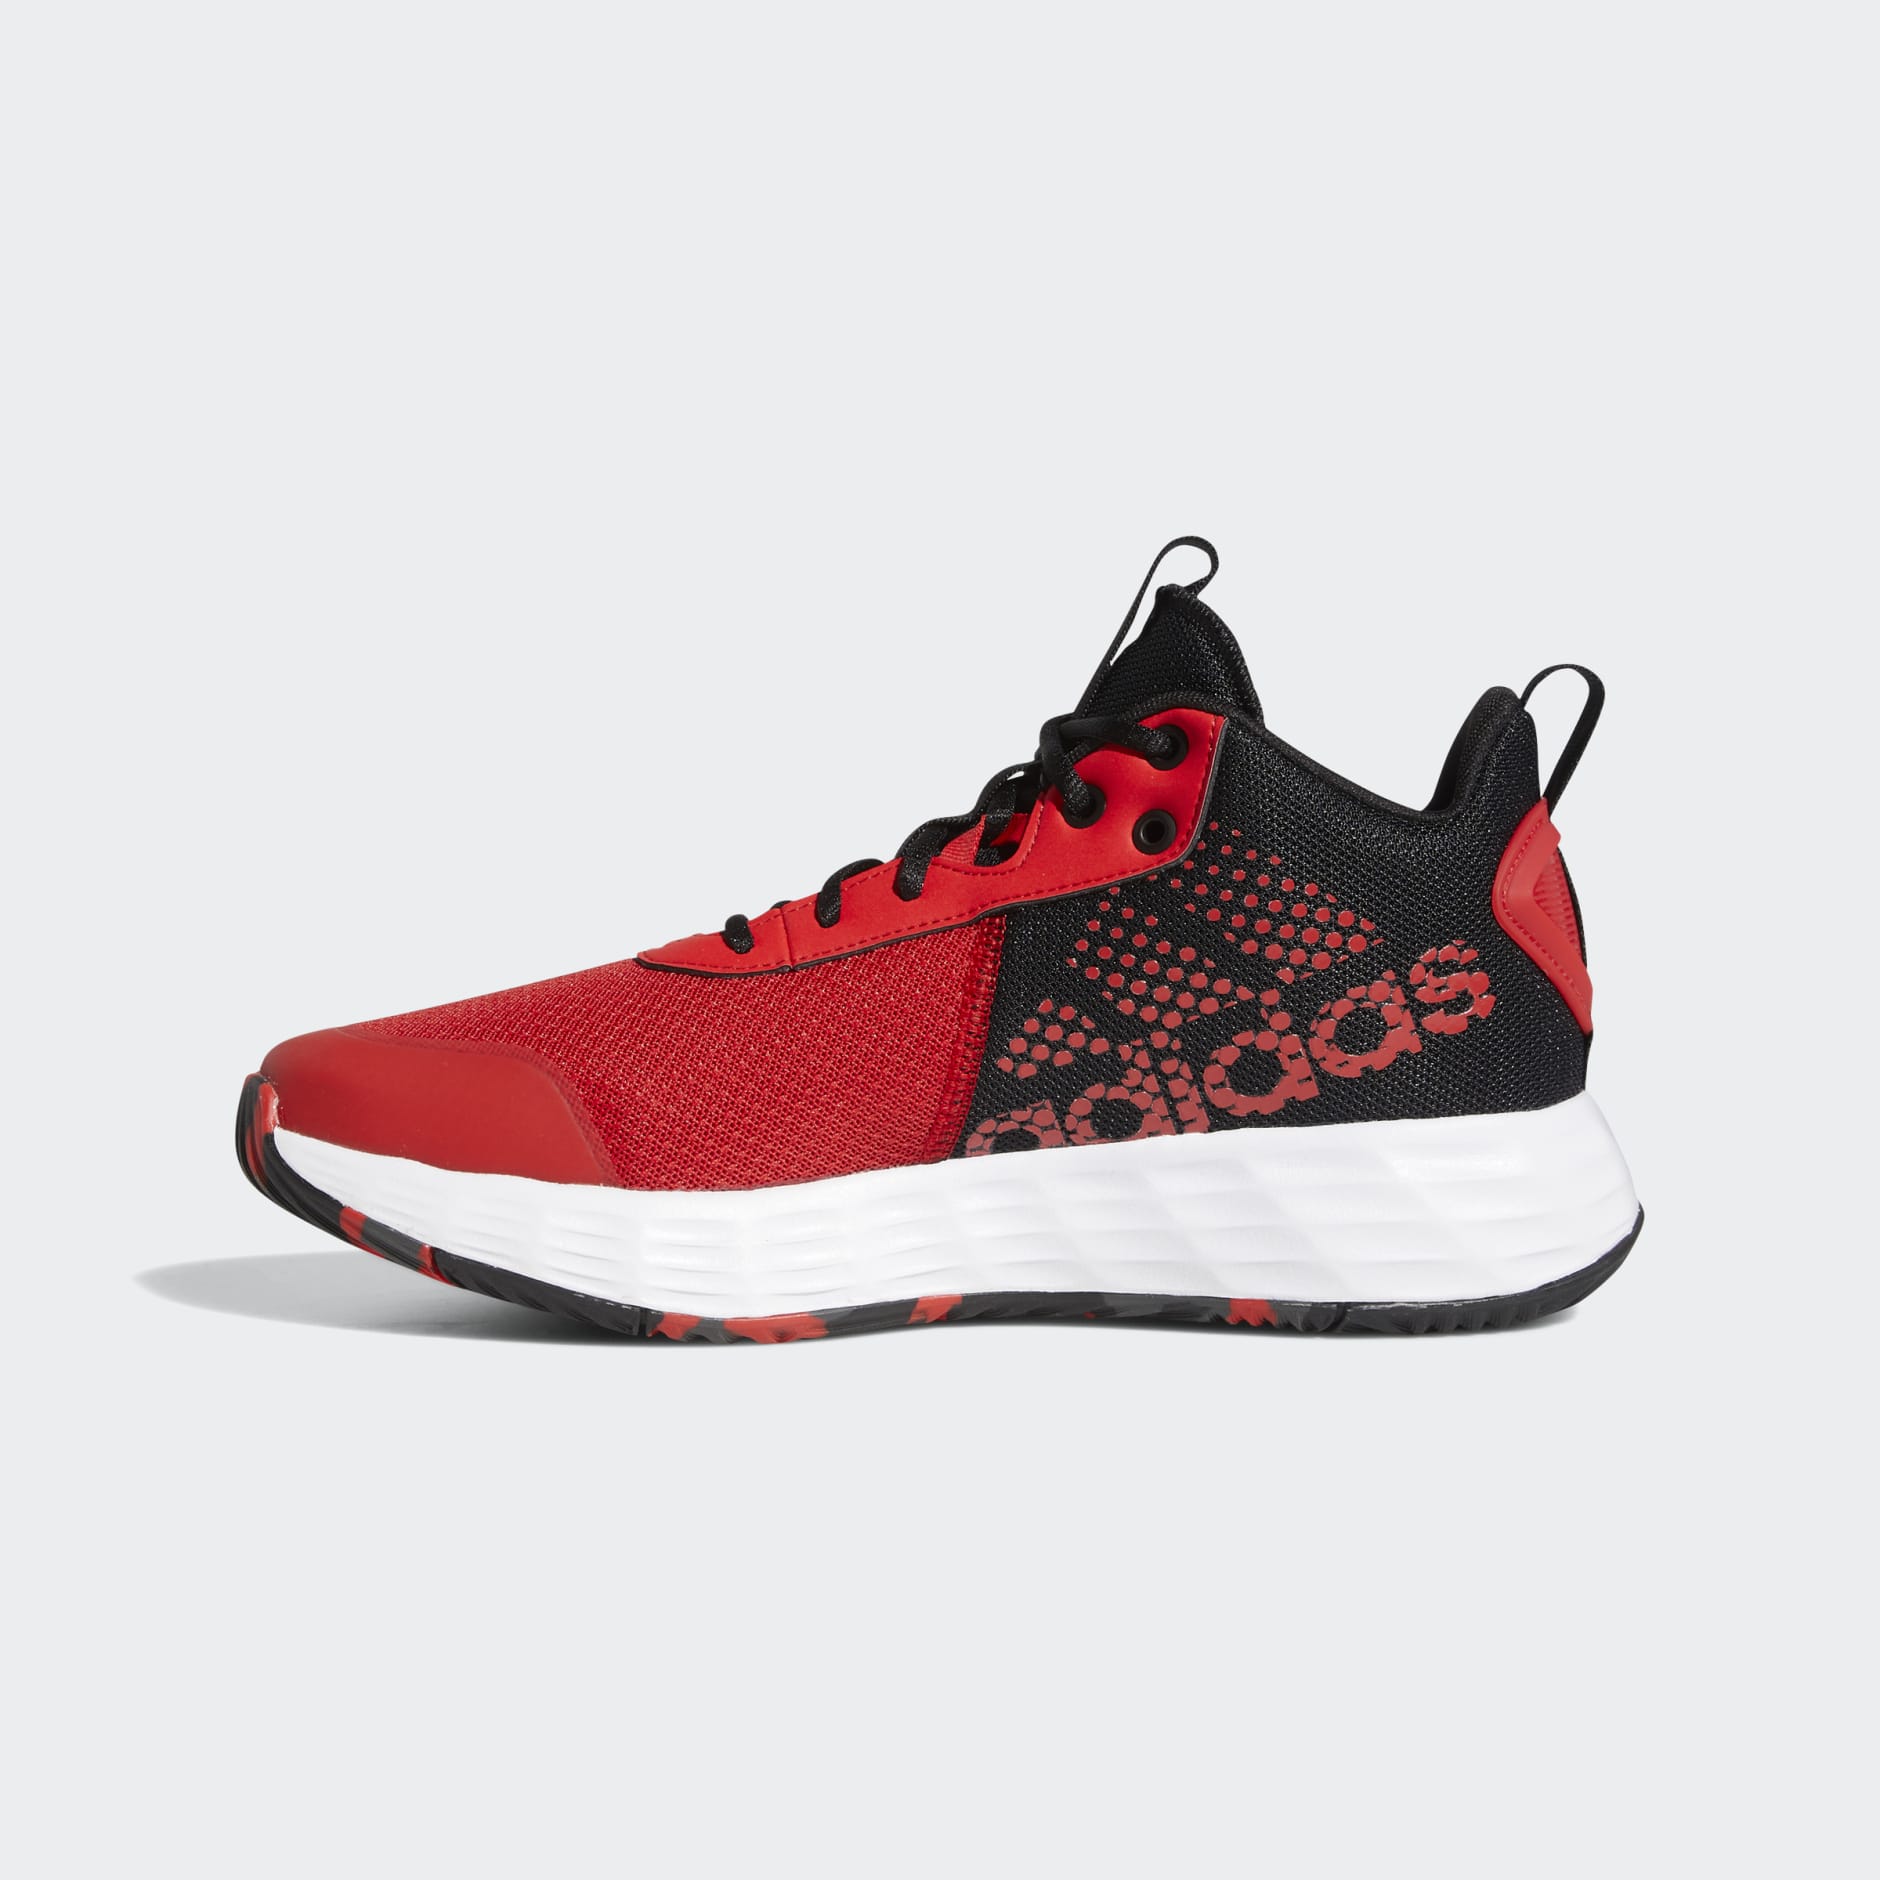 adidas Ownthegame Shoes - Red | adidas LK